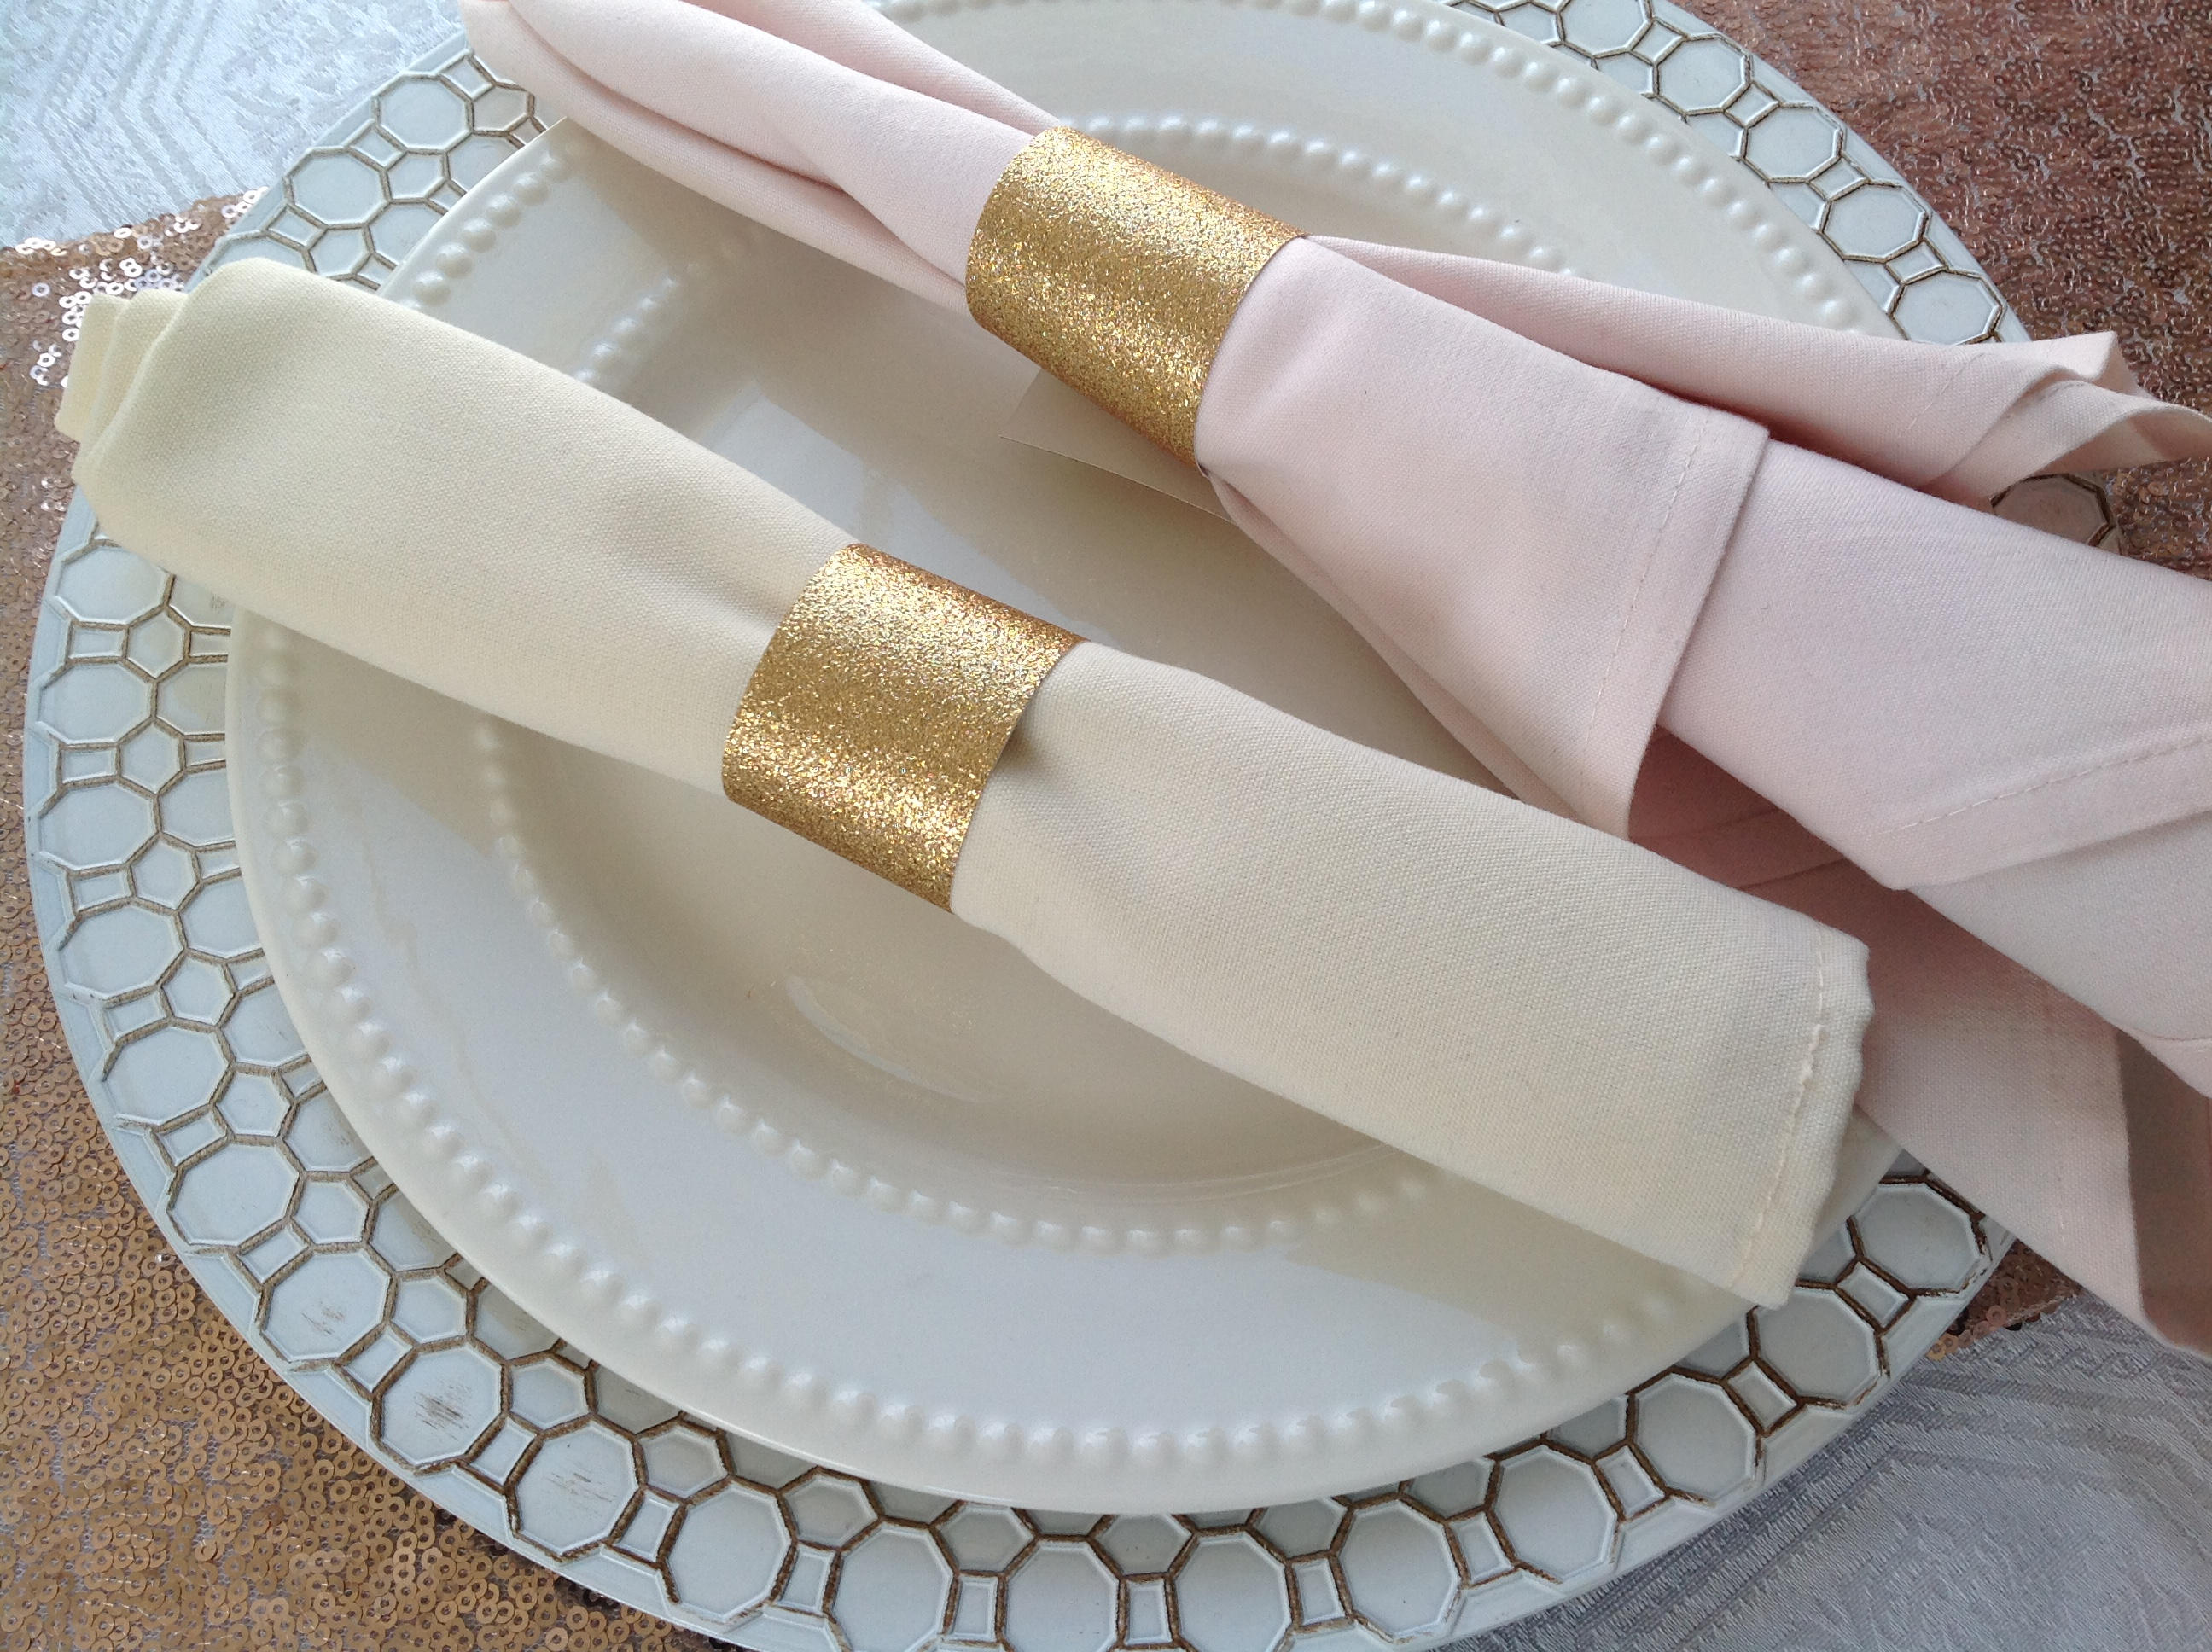 Chair Sash Sparkling Bows for Napkins Tablecloth Hangnuo 120 PCS Rhinestone Gold Napkin Rings for Wedding Reception Baby Shower Party Decoration Curtain 